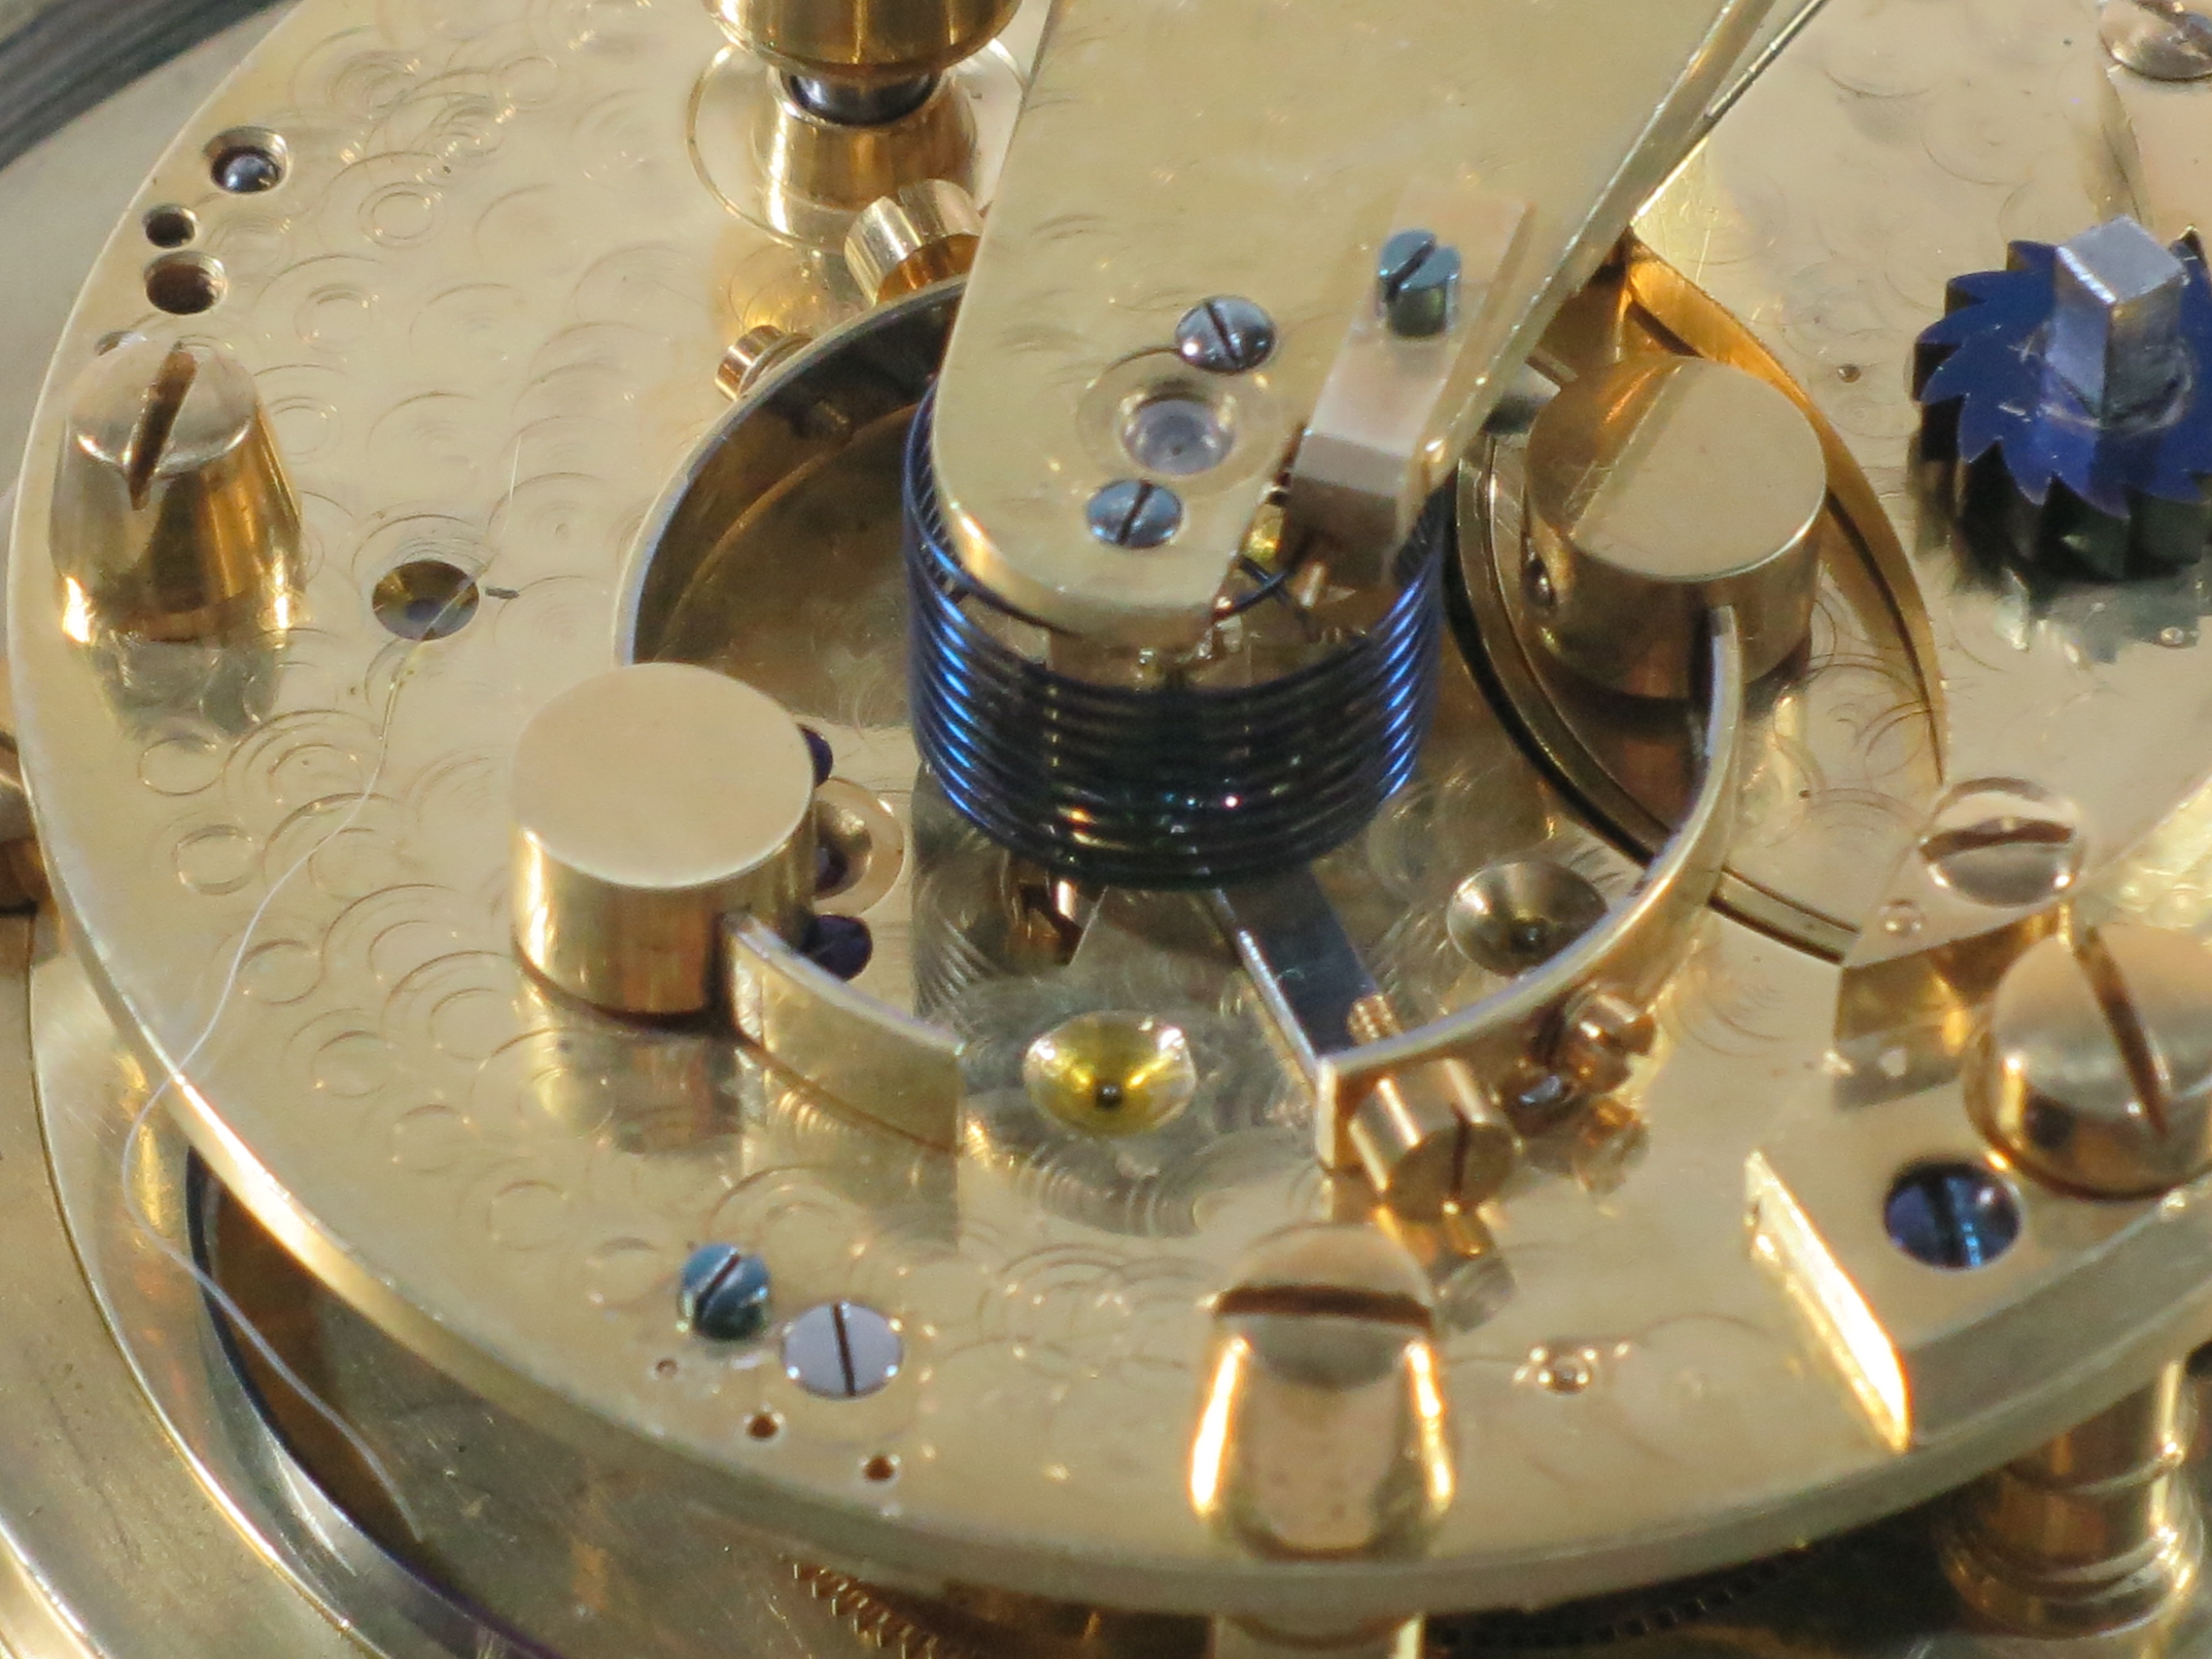 A 2 DAY CHRONOMETER MOVEMENT BY LITHERLAND DAVIES & CO., LIVERPOOL, CIRCA 1845 - Image 6 of 13